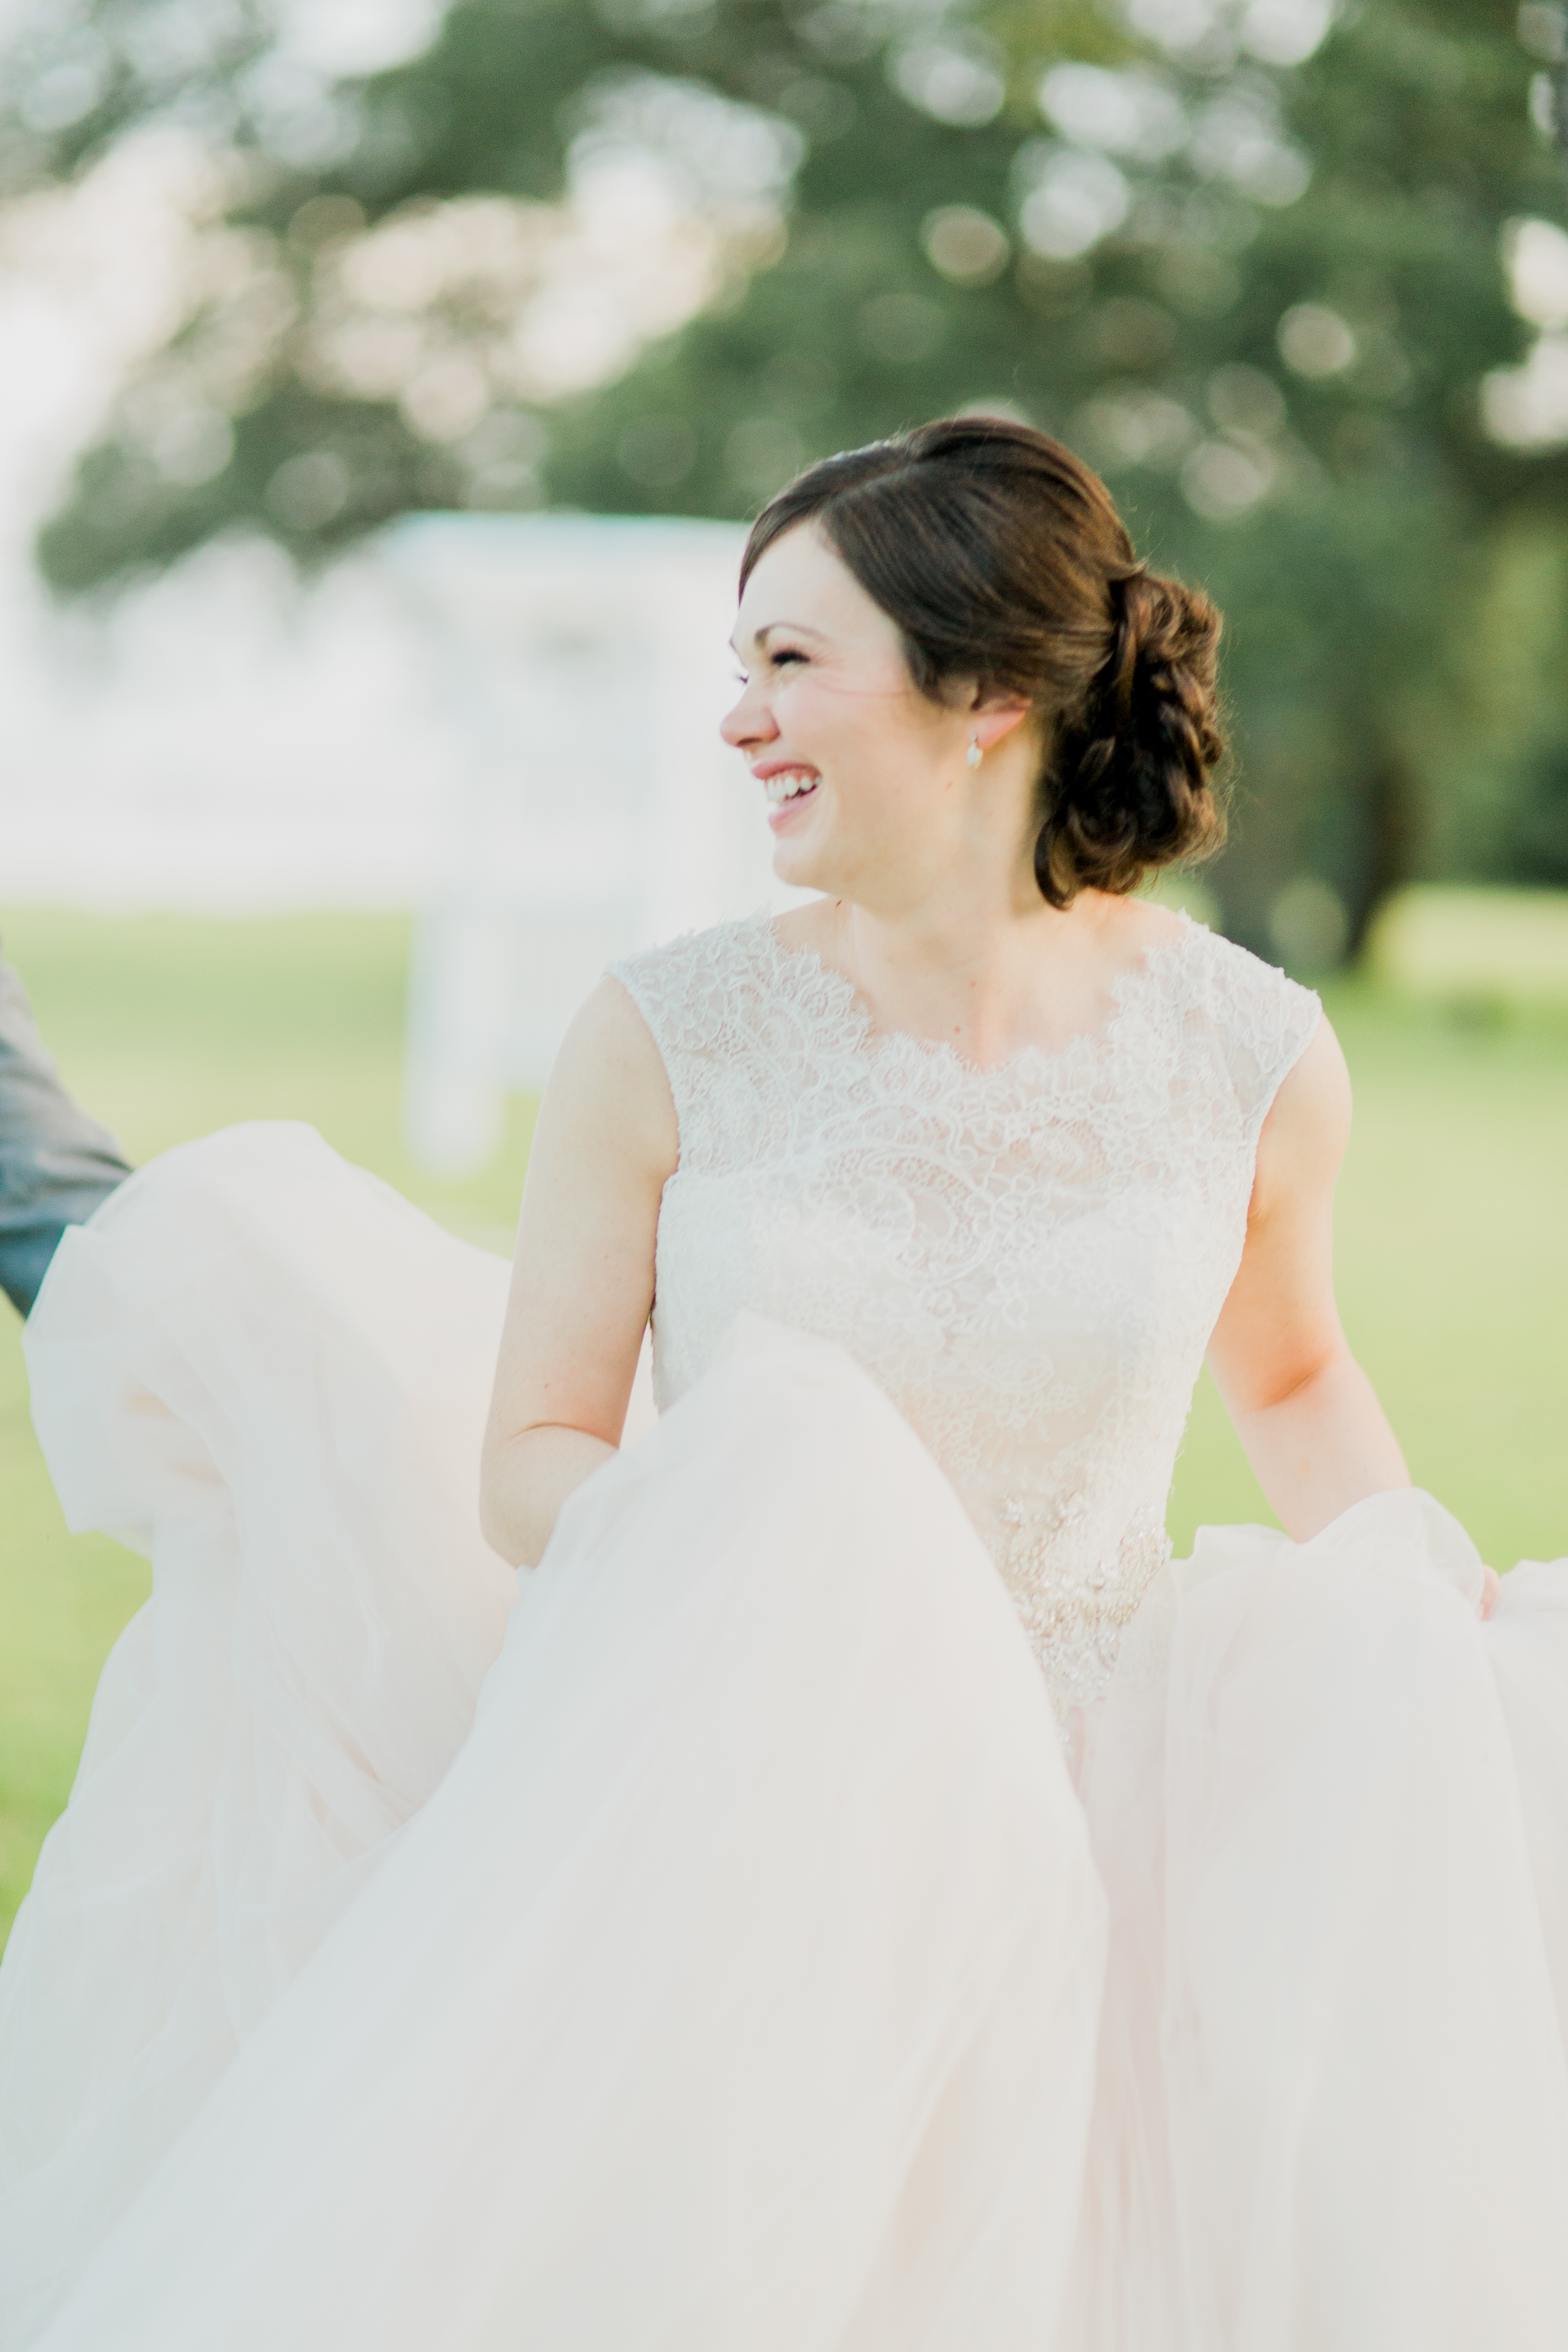 niceville bride and groom portraits at crosspoint church